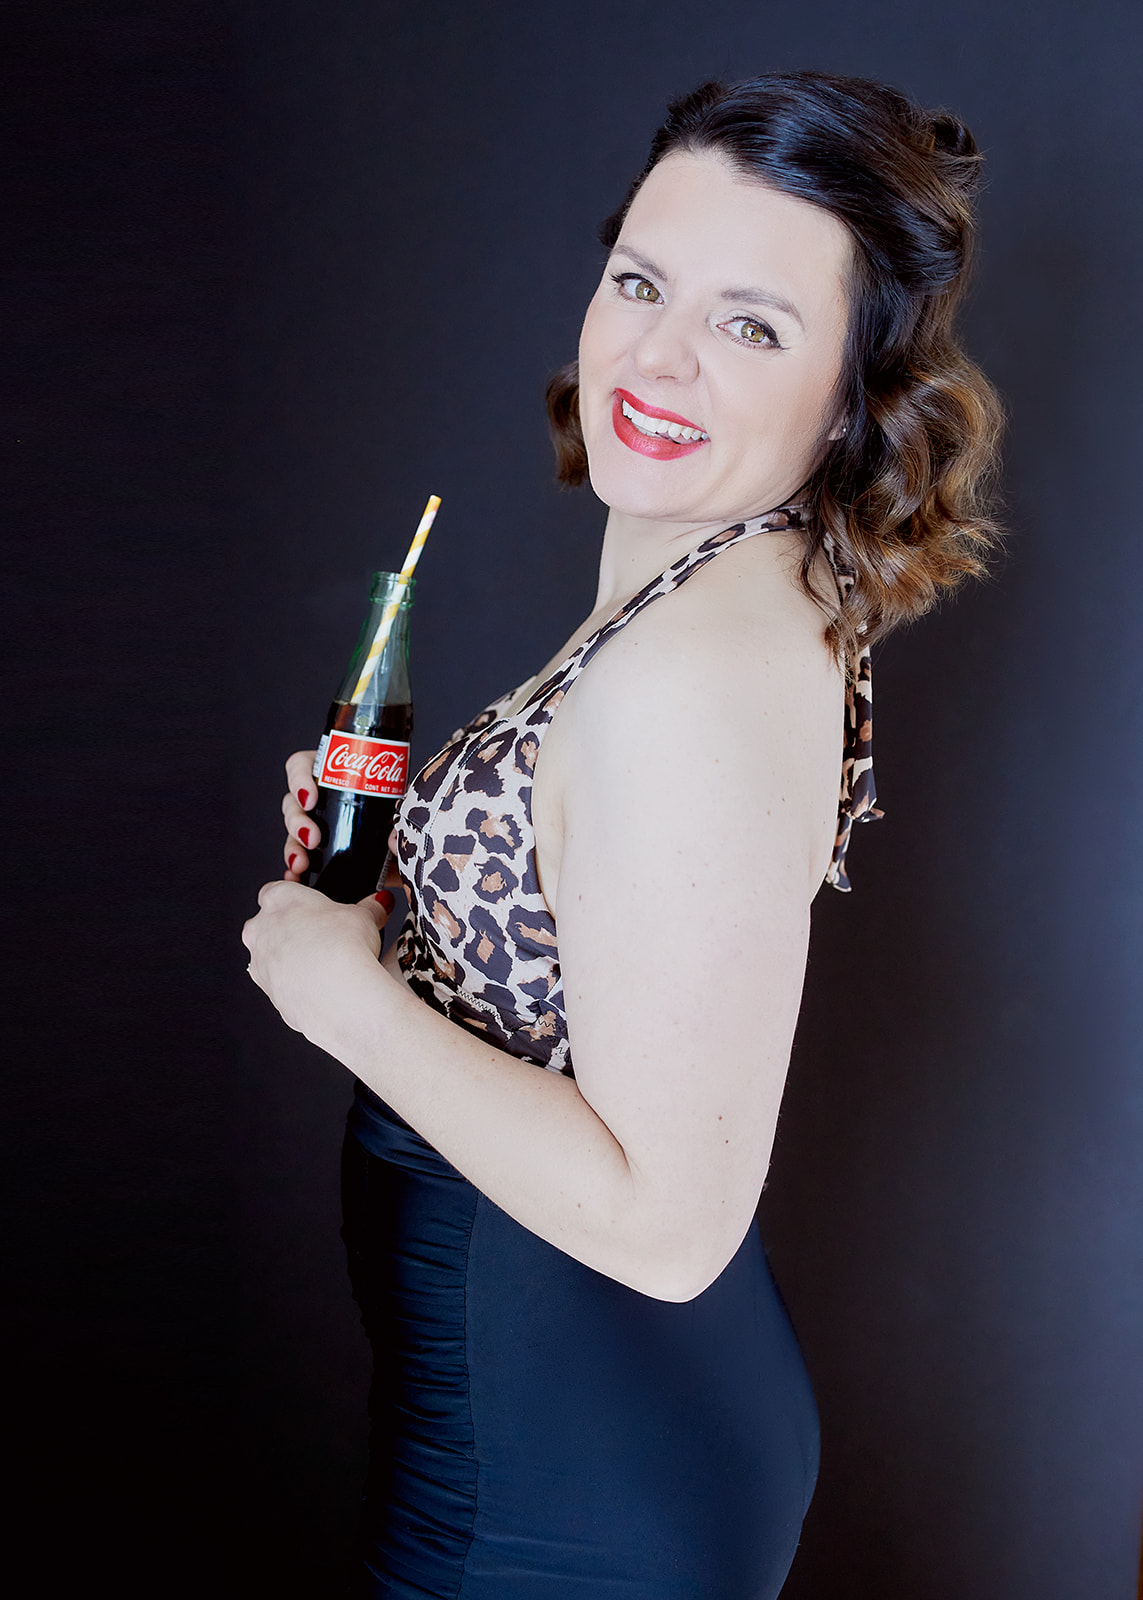 vintage coca cola pin up photography with red sunglasses